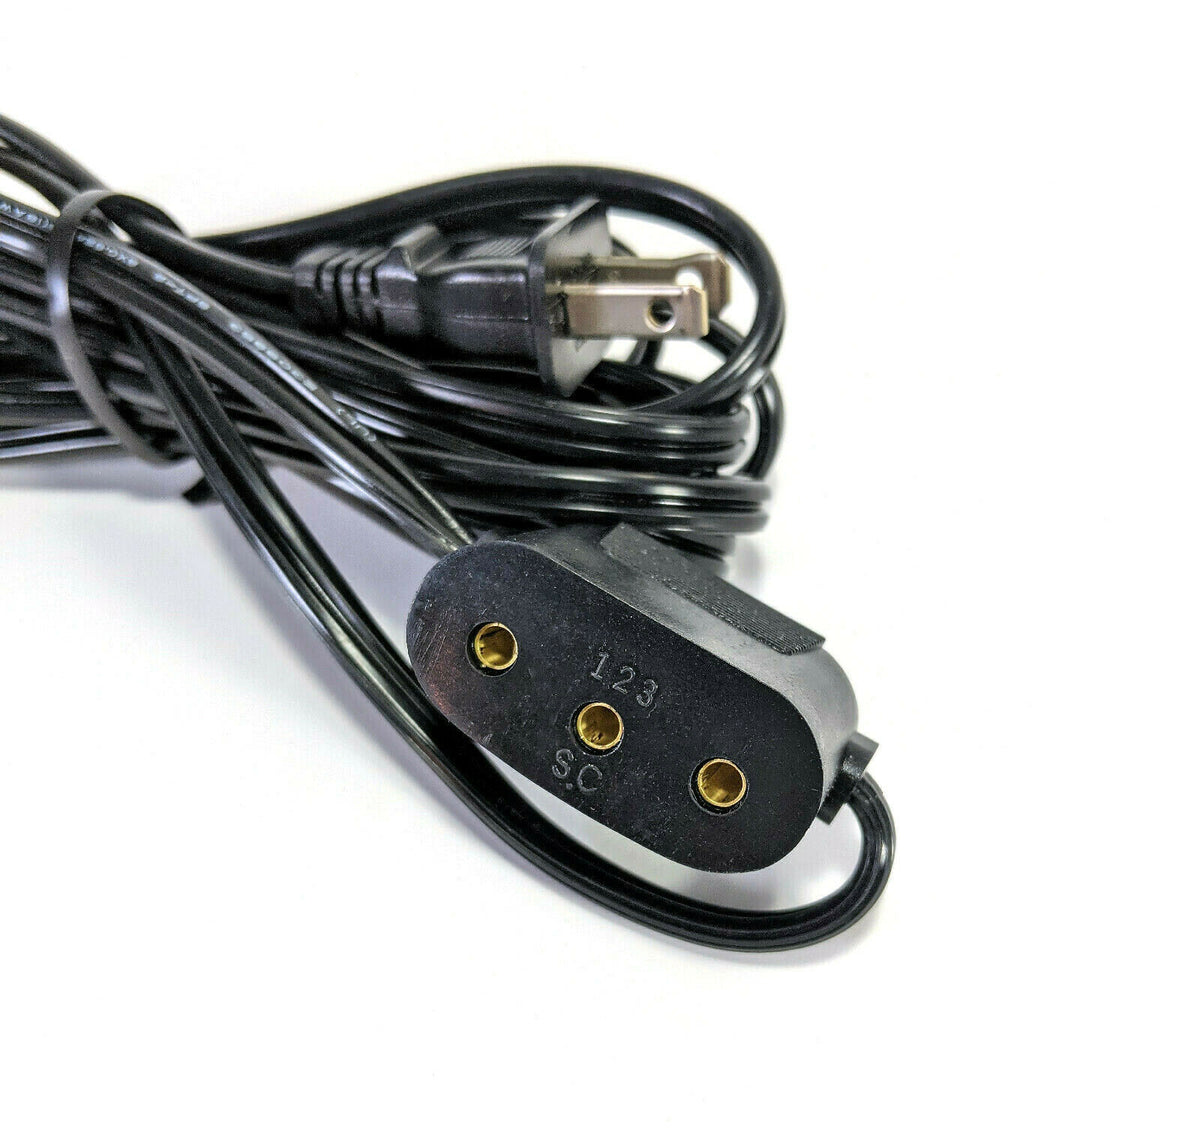 Power Cord, Double Lead For Singer 15-81, 15-90, 221, 222 Sewing Machi -  Cutex Sewing Supplies